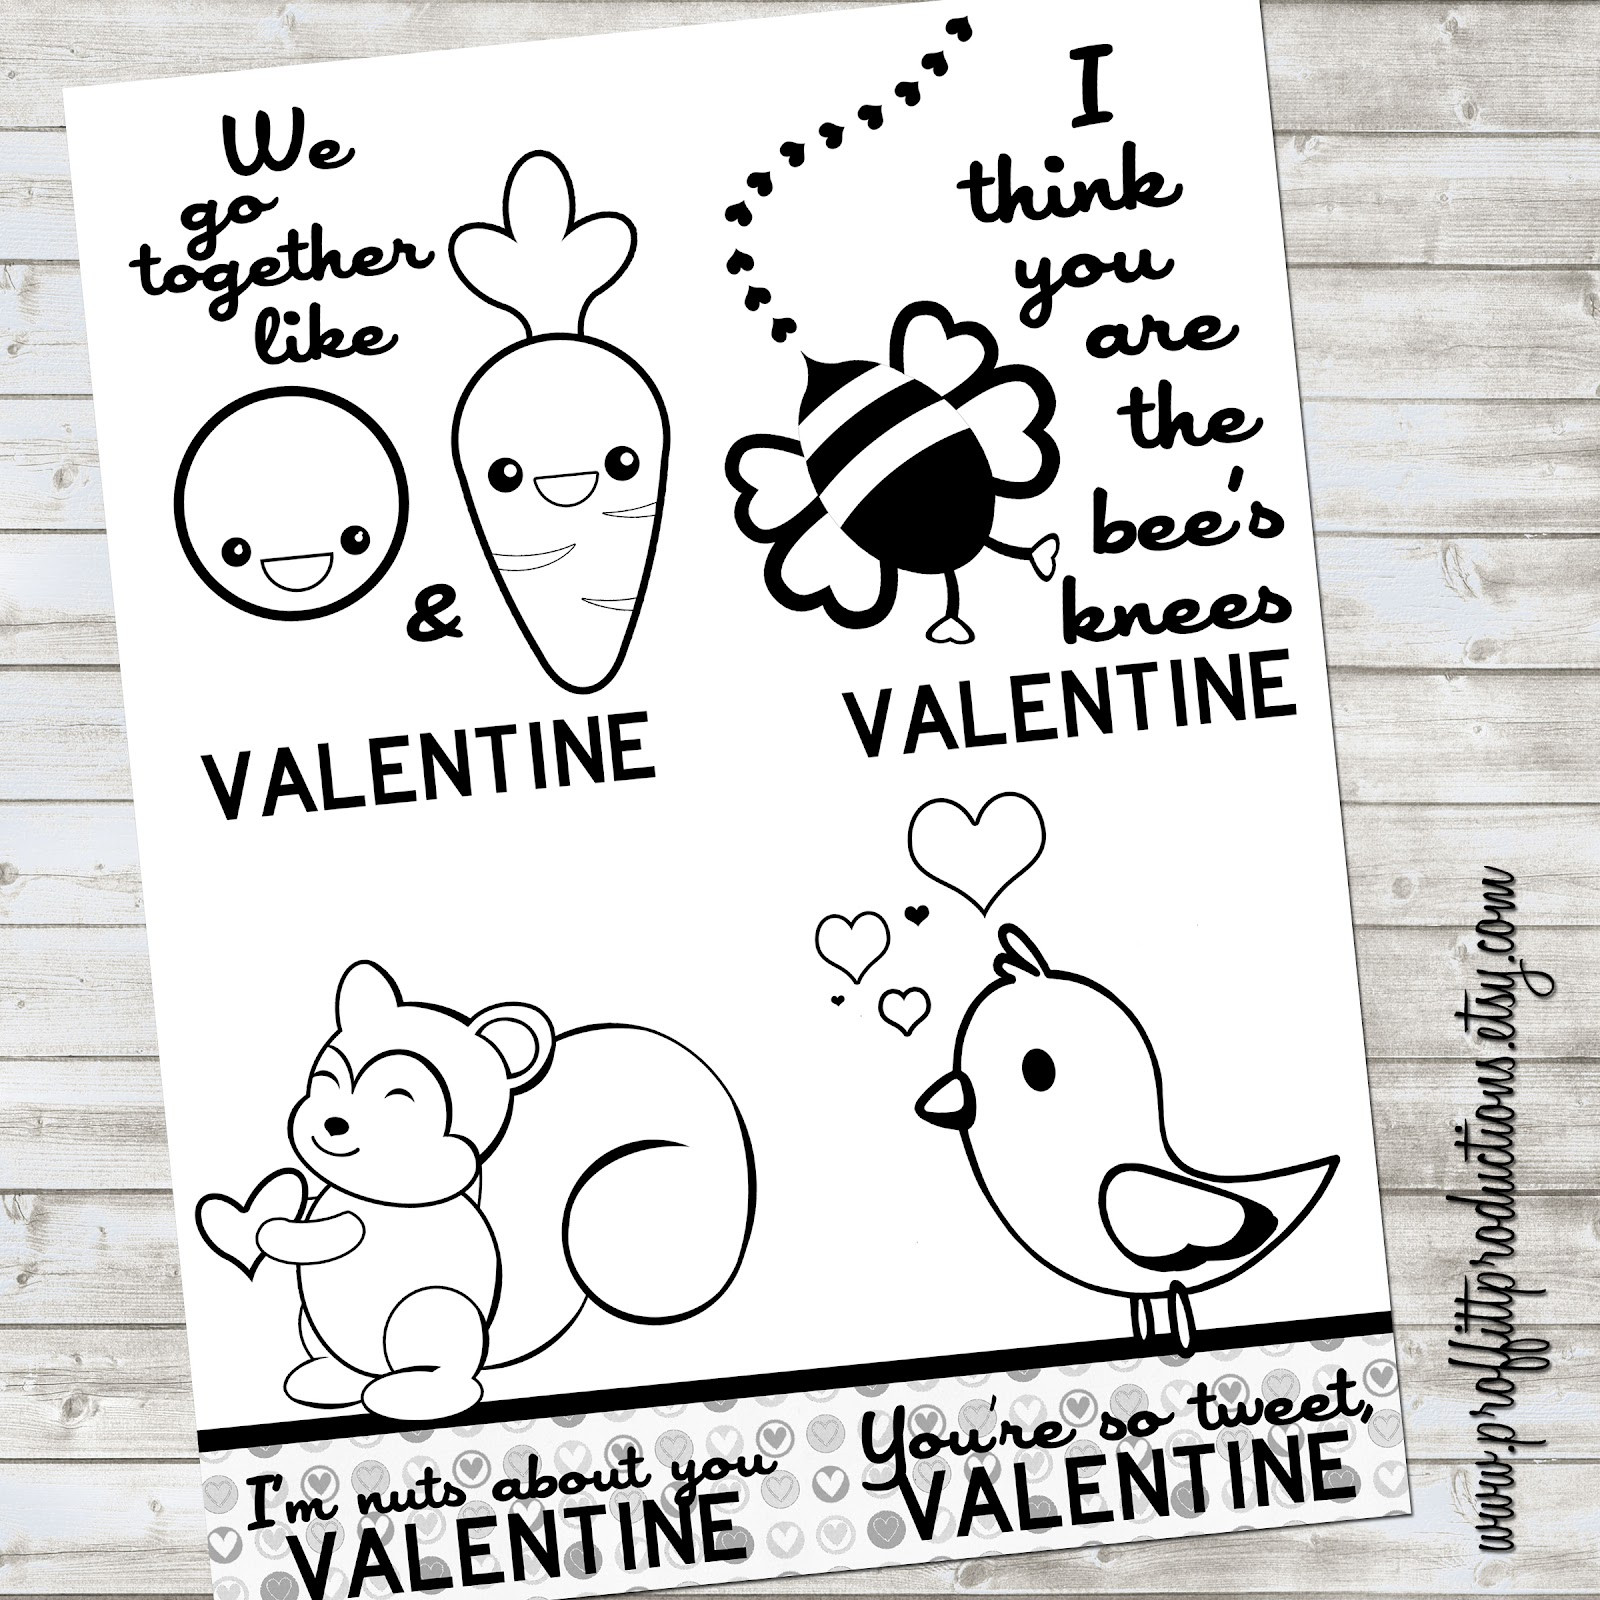 Valentine Day Quotes For Kids
 Funny Gallery Valentines day sayings for kids